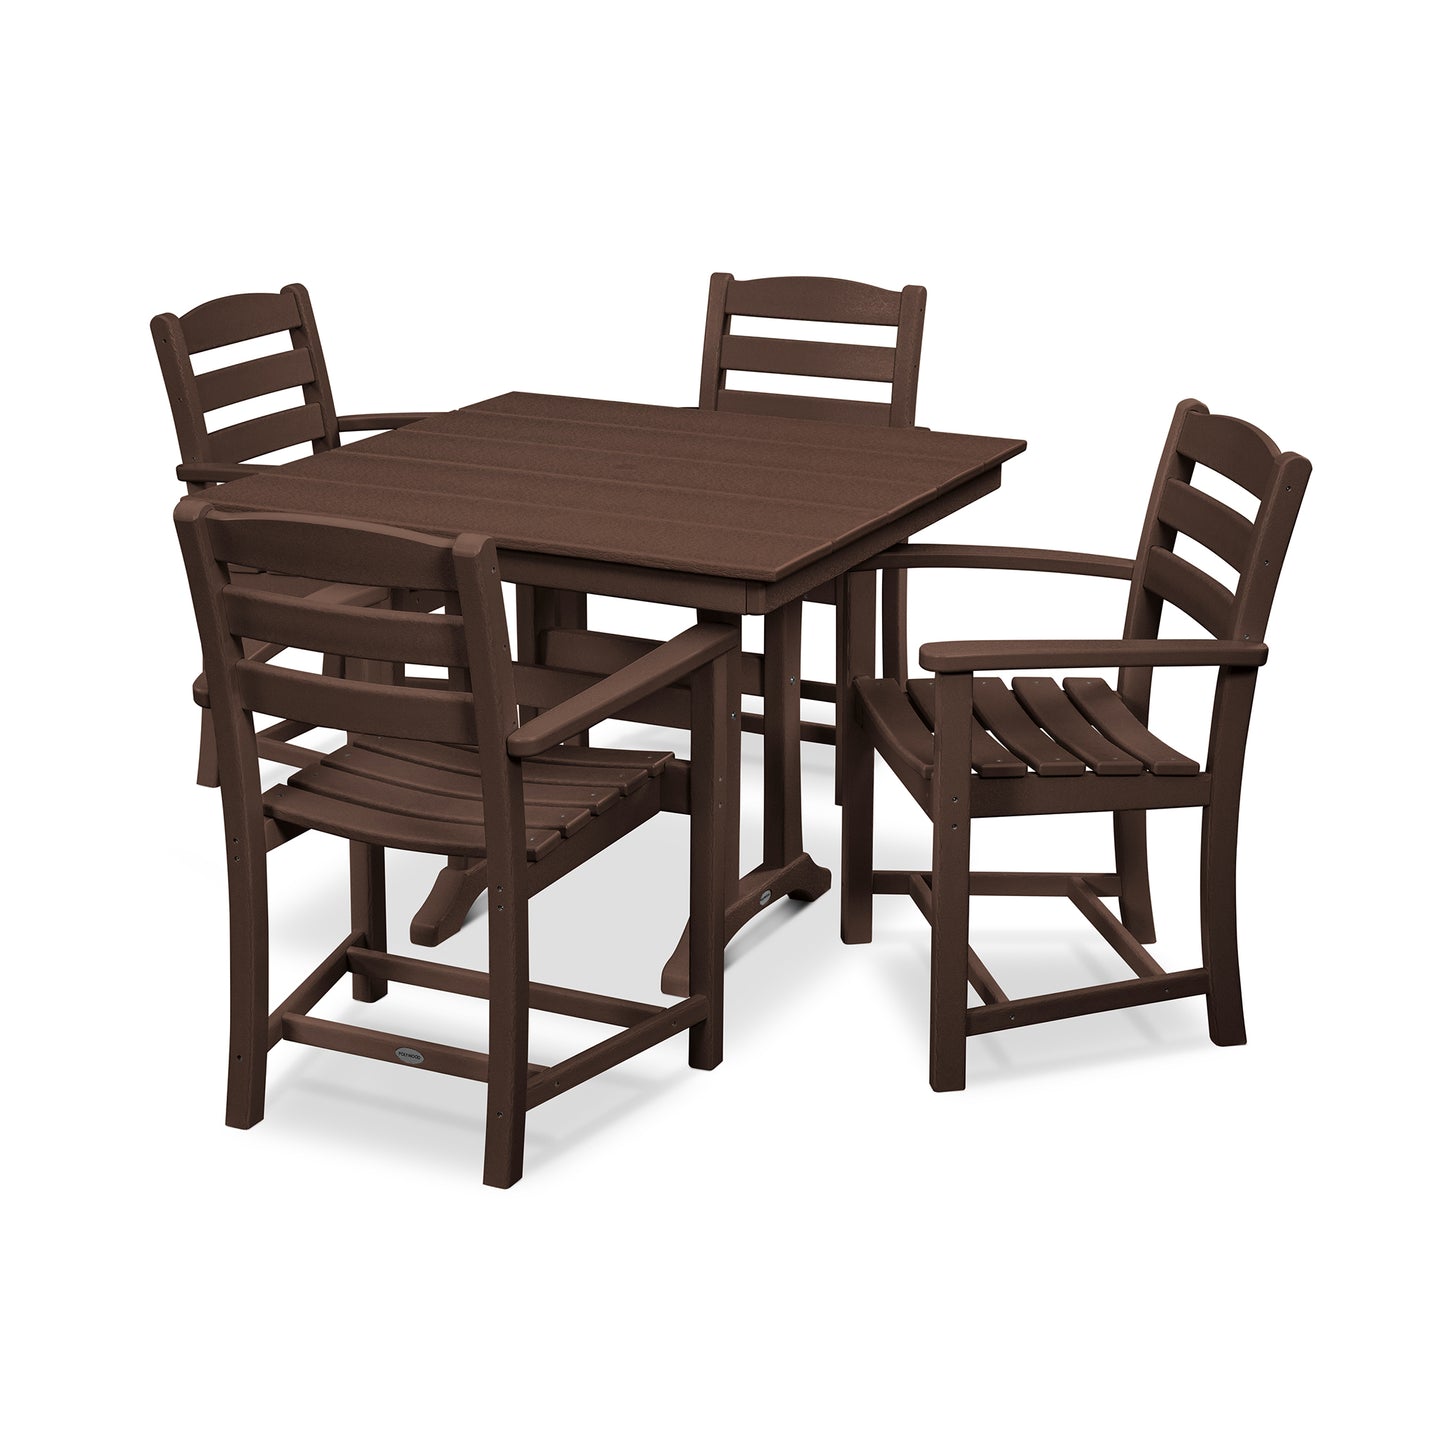 A brown outdoor dining set composed of a square table and four chairs, all made of weather-resistant POLYWOOD lumber, arranged against a plain white background.